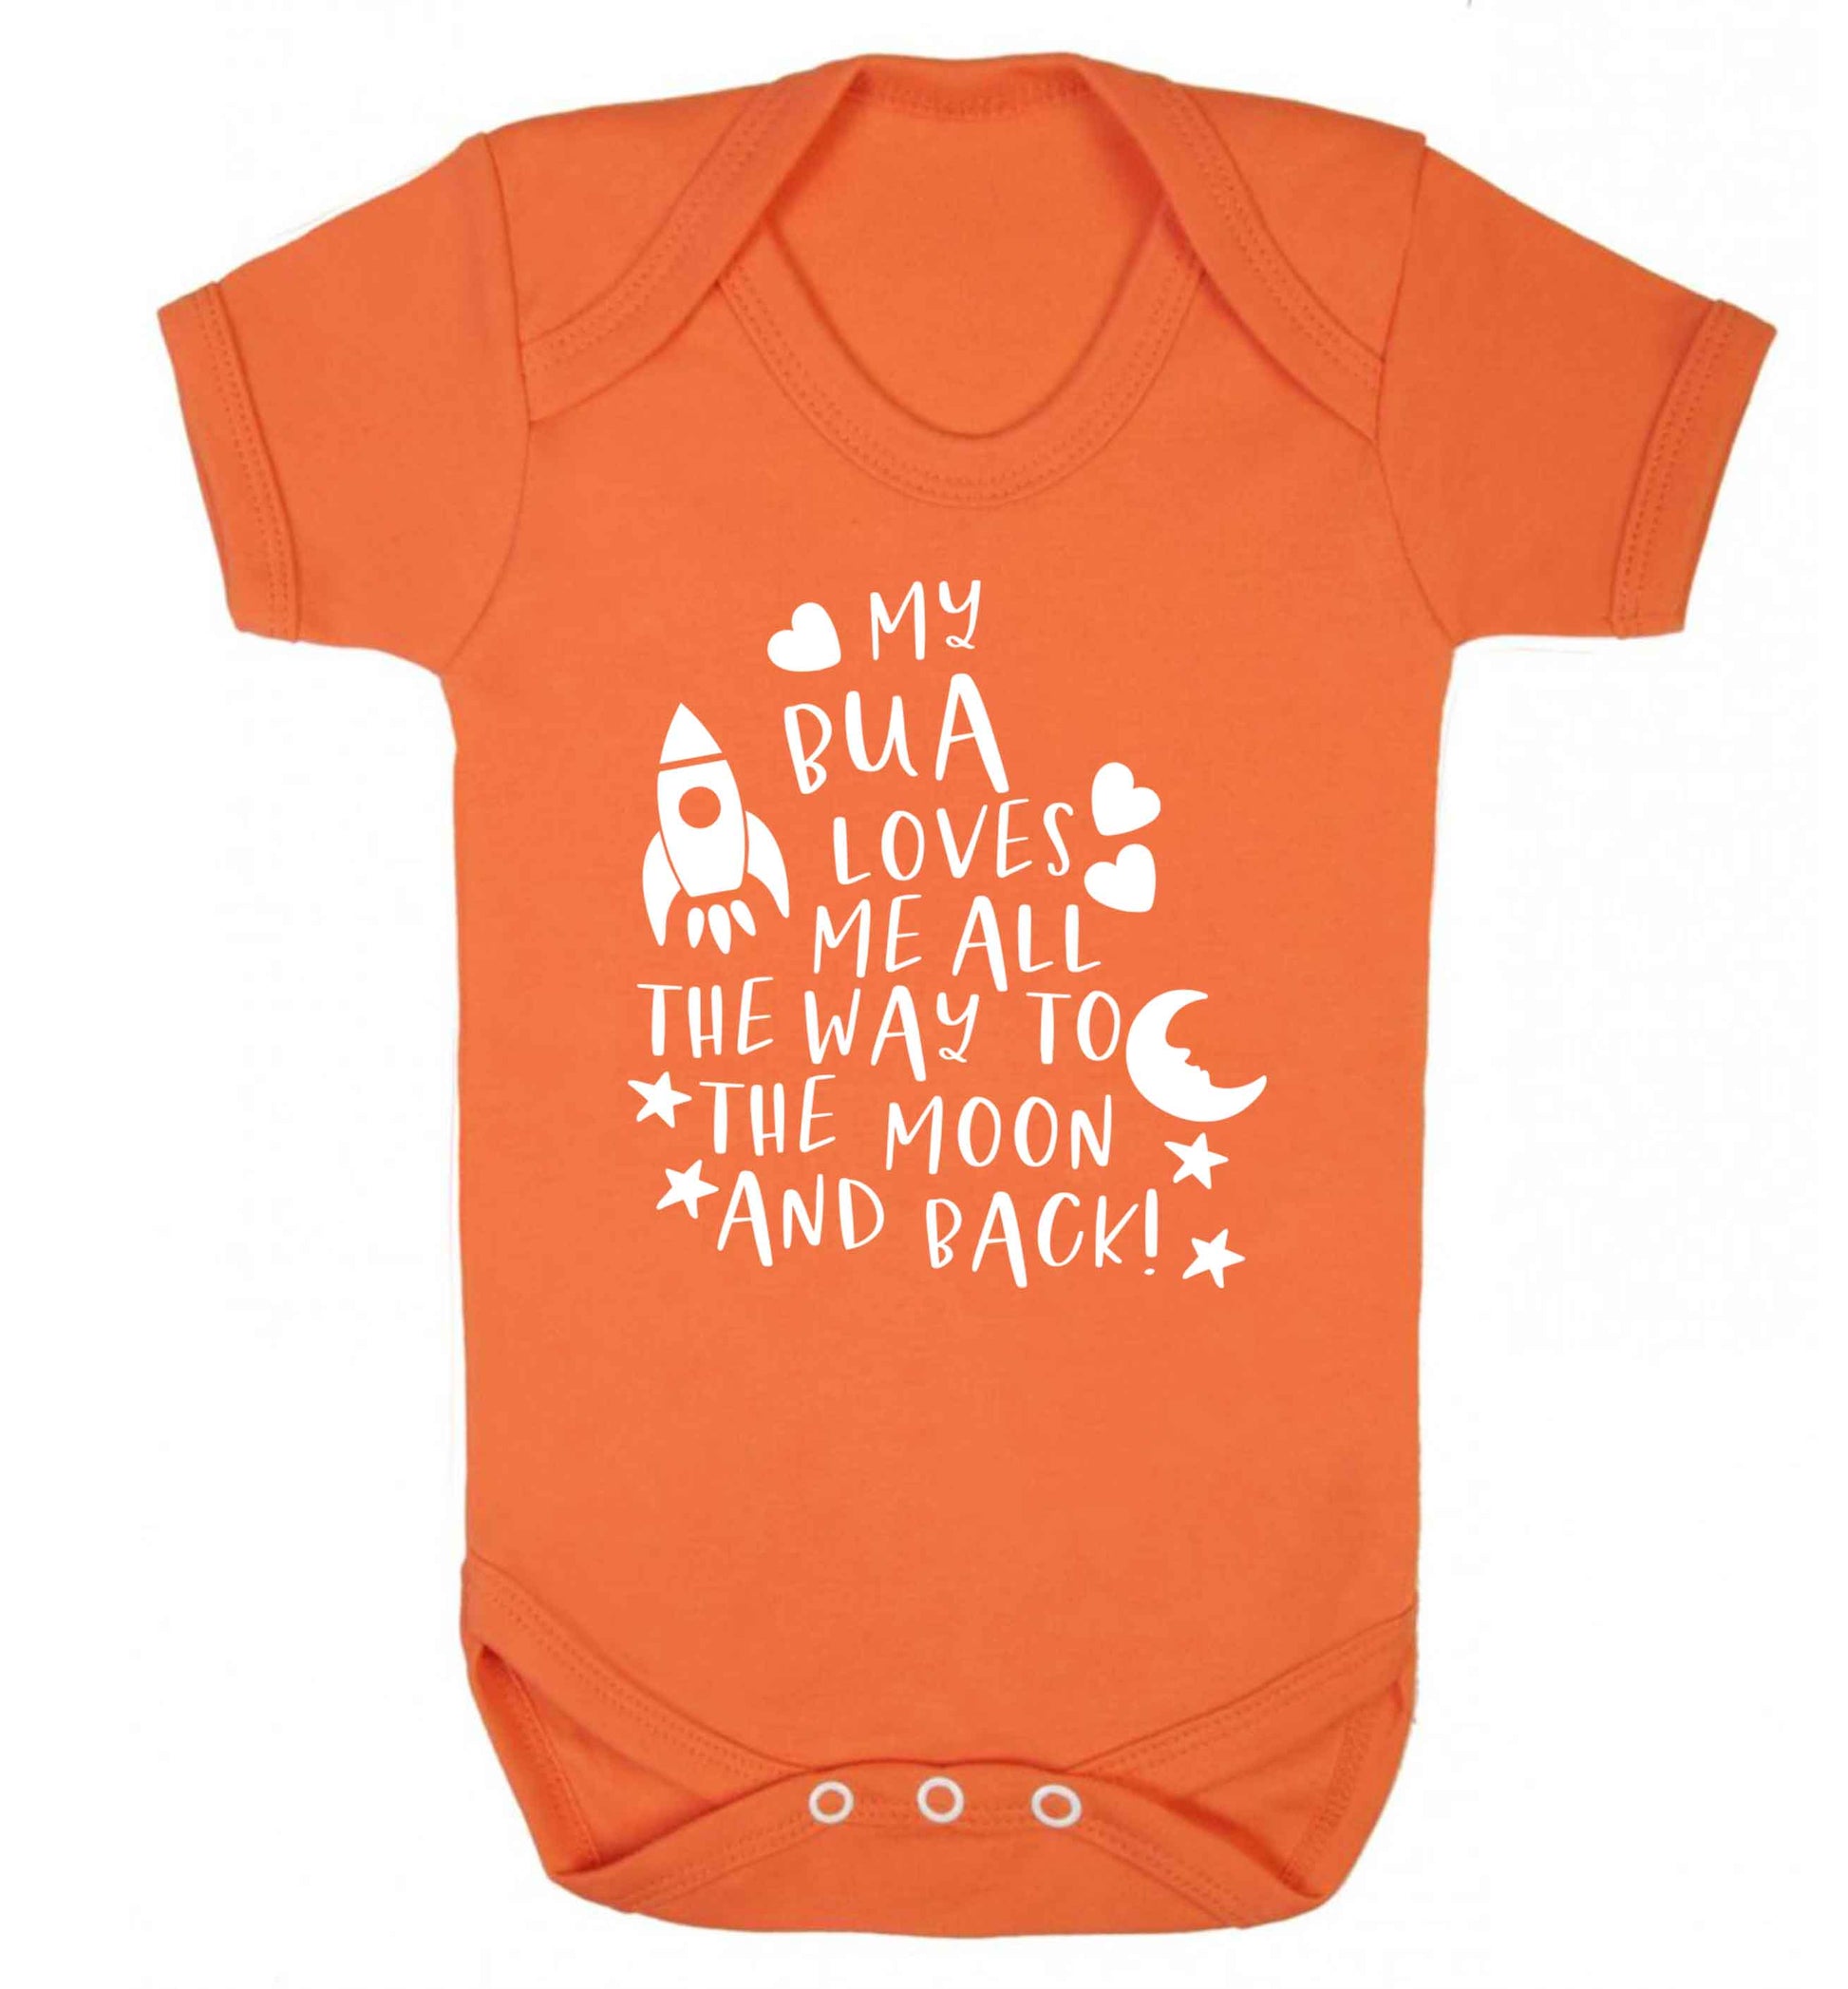 My bua loves me all they way to the moon and back Baby Vest orange 18-24 months